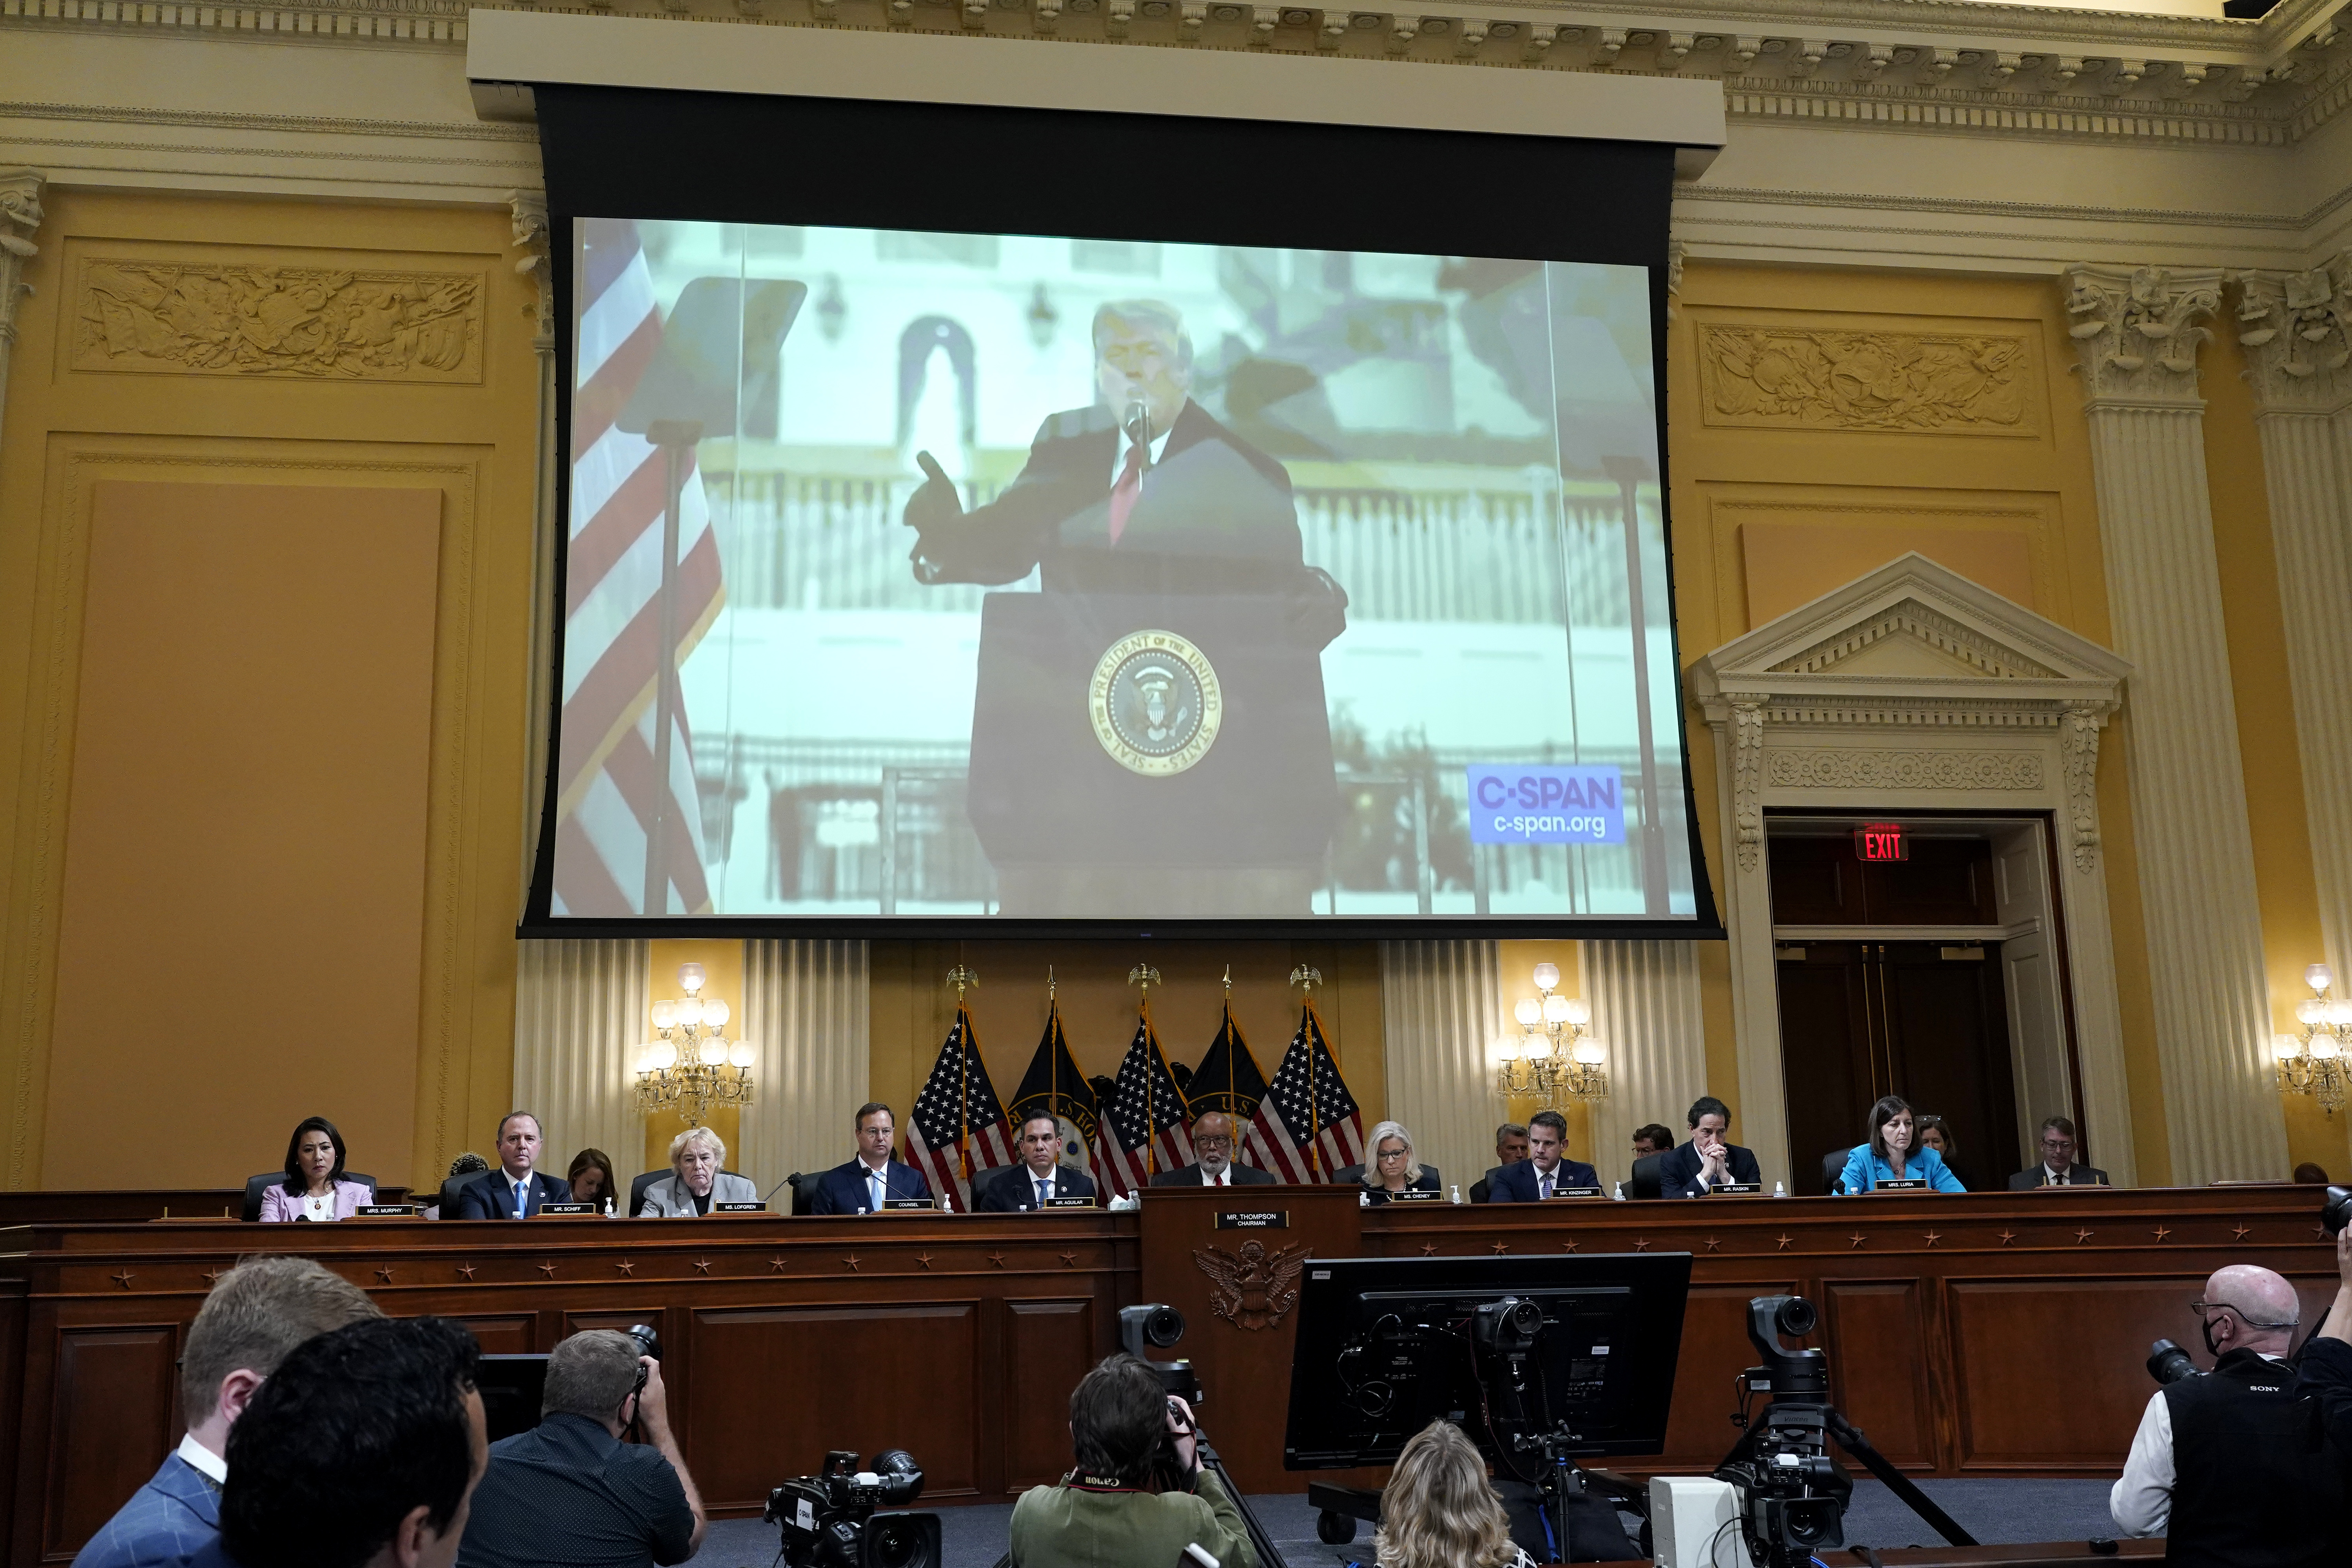 A video of former President Donald Trump speaking during a rally, as the House select committee investigating the Jan. 6, 2021, attack on the Capitol holds a hearing at the Capitol in Washington, Thursday, June 16, 2022.  The traumas of Watergate and Jan. 6 are a half century apart, in vastly different eras, and they were about different things. But in both episodes, a president tried to do an end run around democracy. Friday is the 50th anniversary of the Watergate break-in that eventually cons